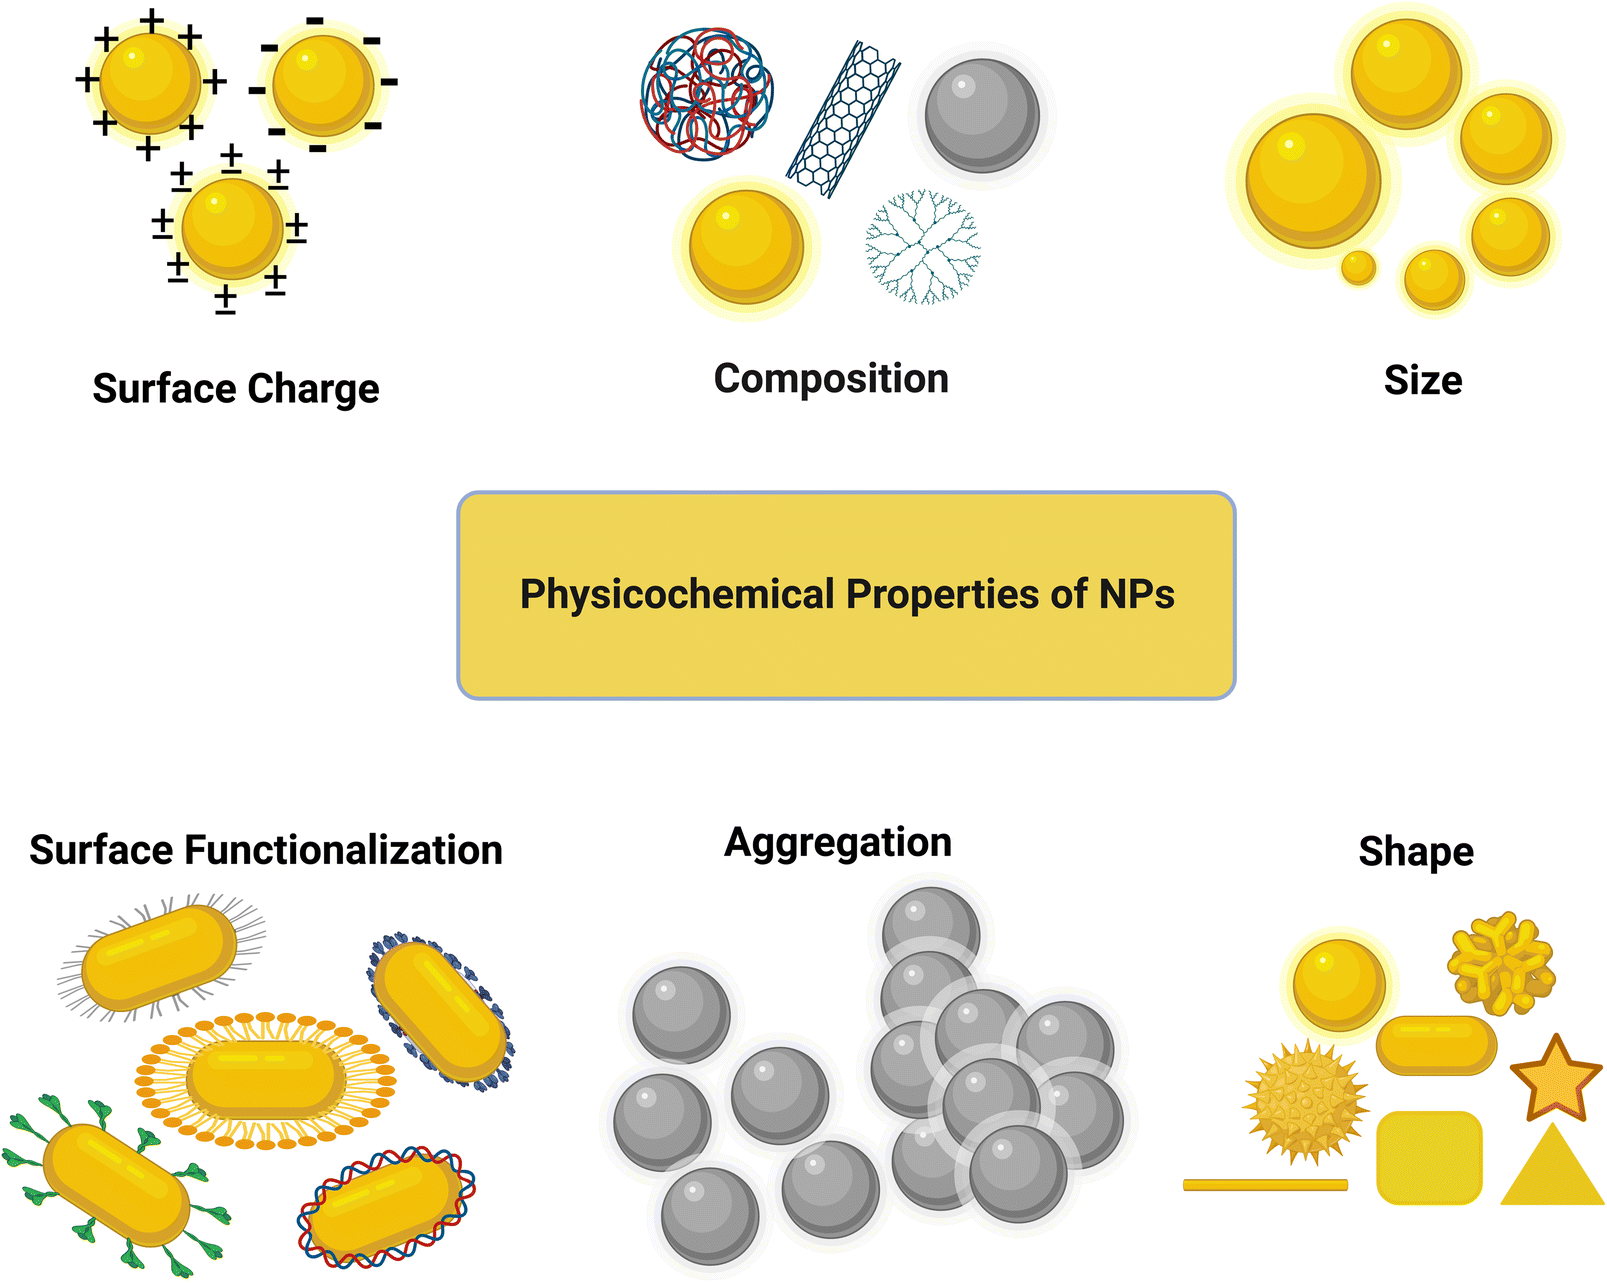 Commonly used techniques for in vivo testing with NPs, which may lead